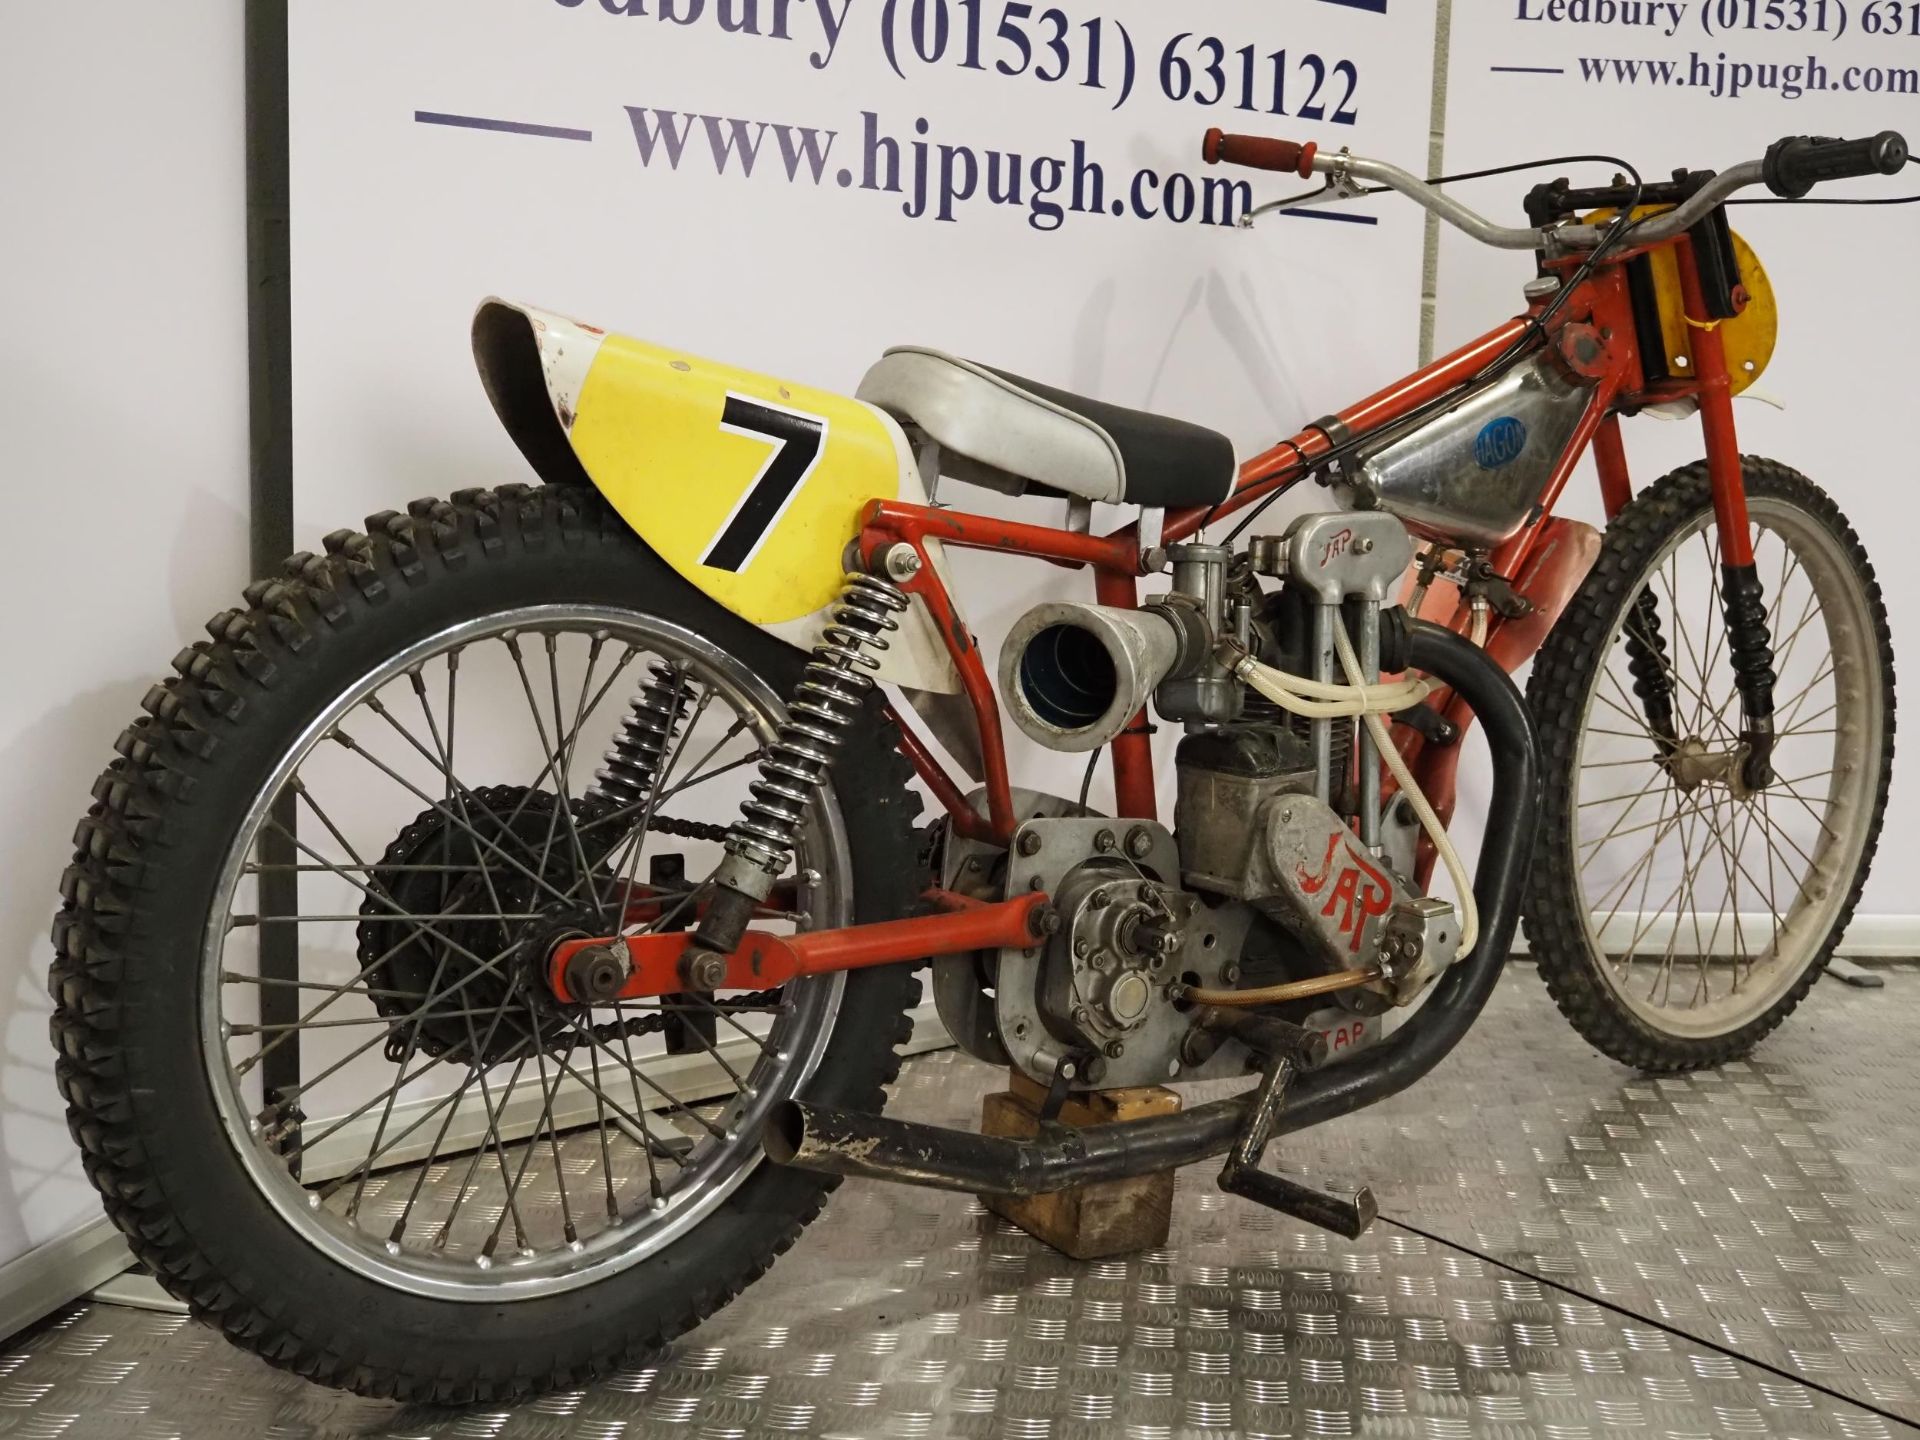 Hagon JAP grasstrack motorcycle. 1960s. 500cc. Engine No. JOS/D/77293/4 Engine turns over. Has - Image 4 of 8